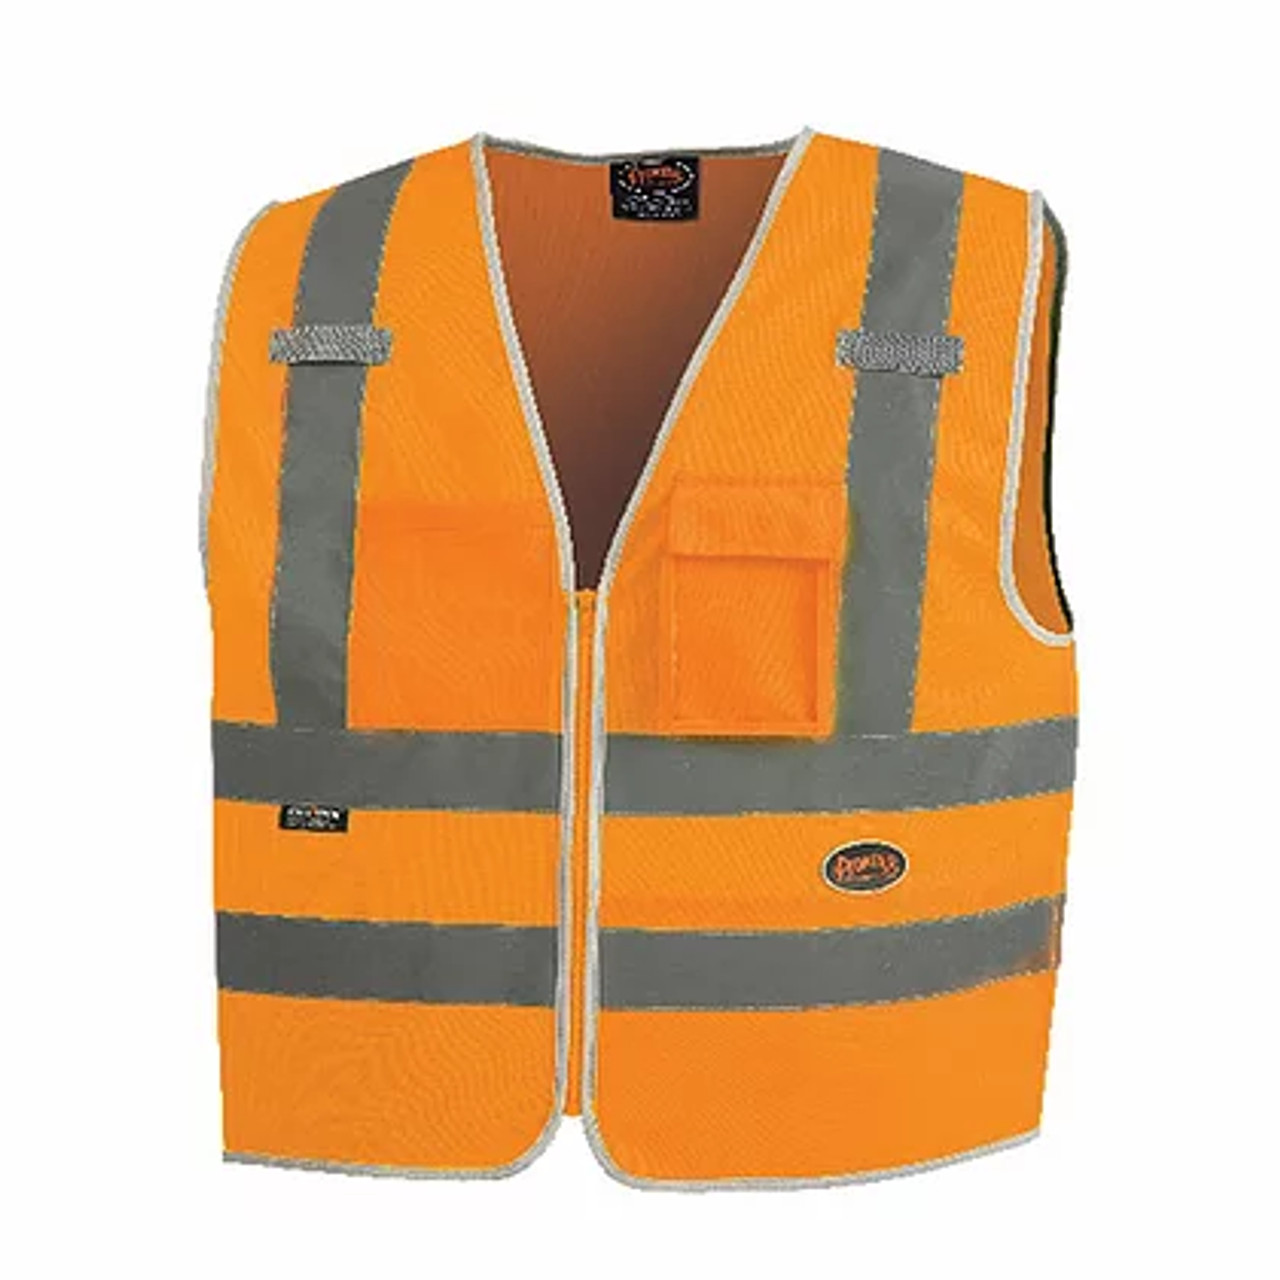 Valkuilen jeugd Aanpassen SureWerx Pioneer 100% Tricot Polyester Multi-Pocket Safety Vest, Multiple  Sizes and Colors Available - Each - Western Safety